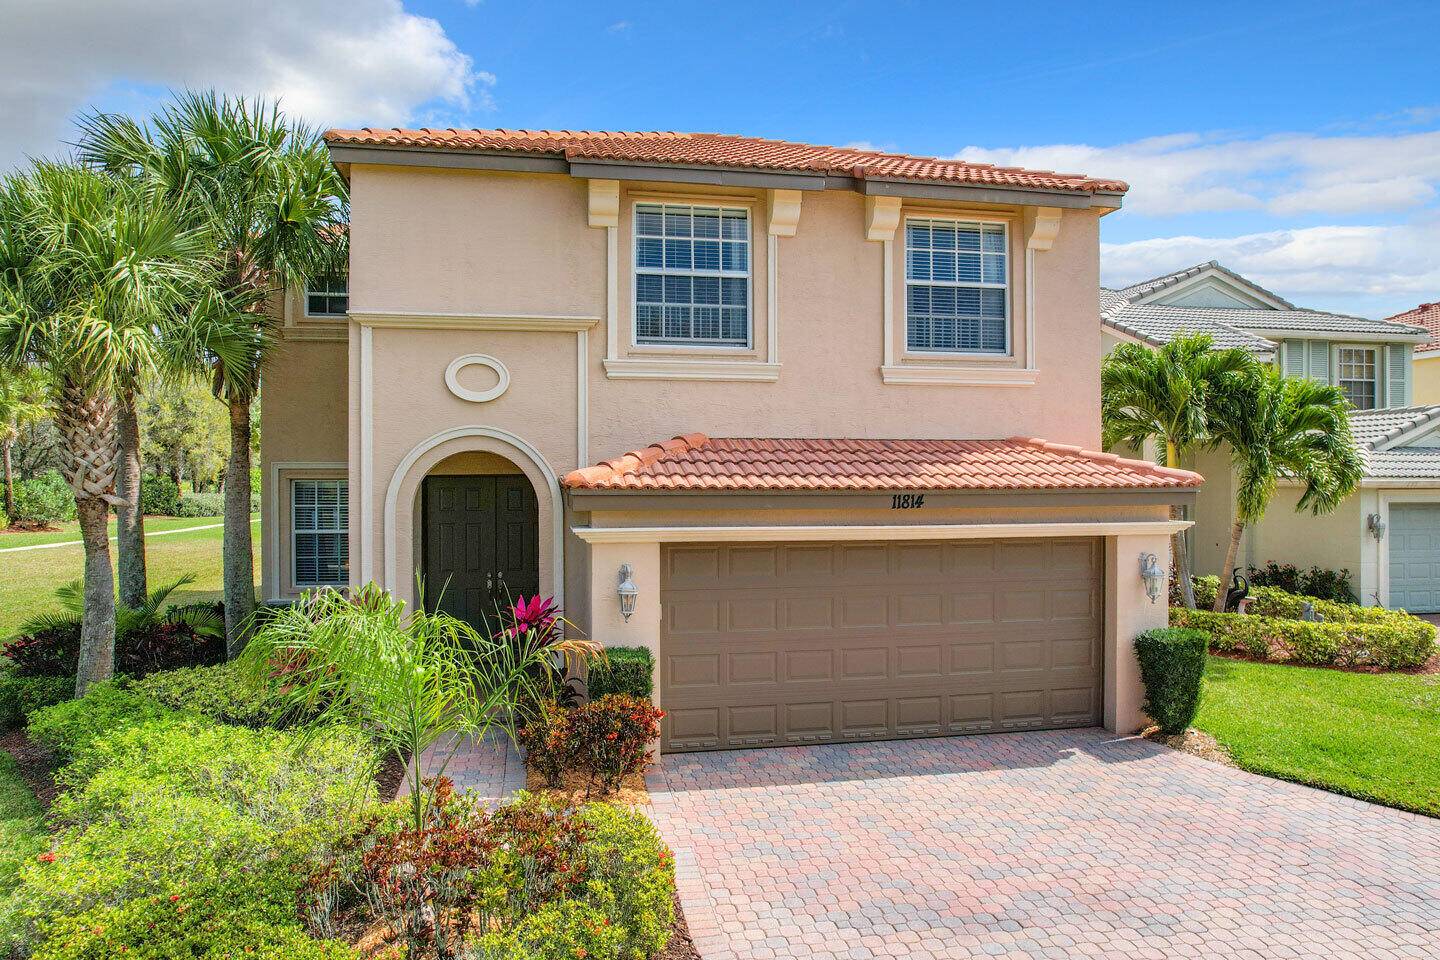 Spectacular private 4 bedroom, 3 bath POOL home nestled on a premium waterfront lot within the exclusive gated community of Town Park at Tradition.